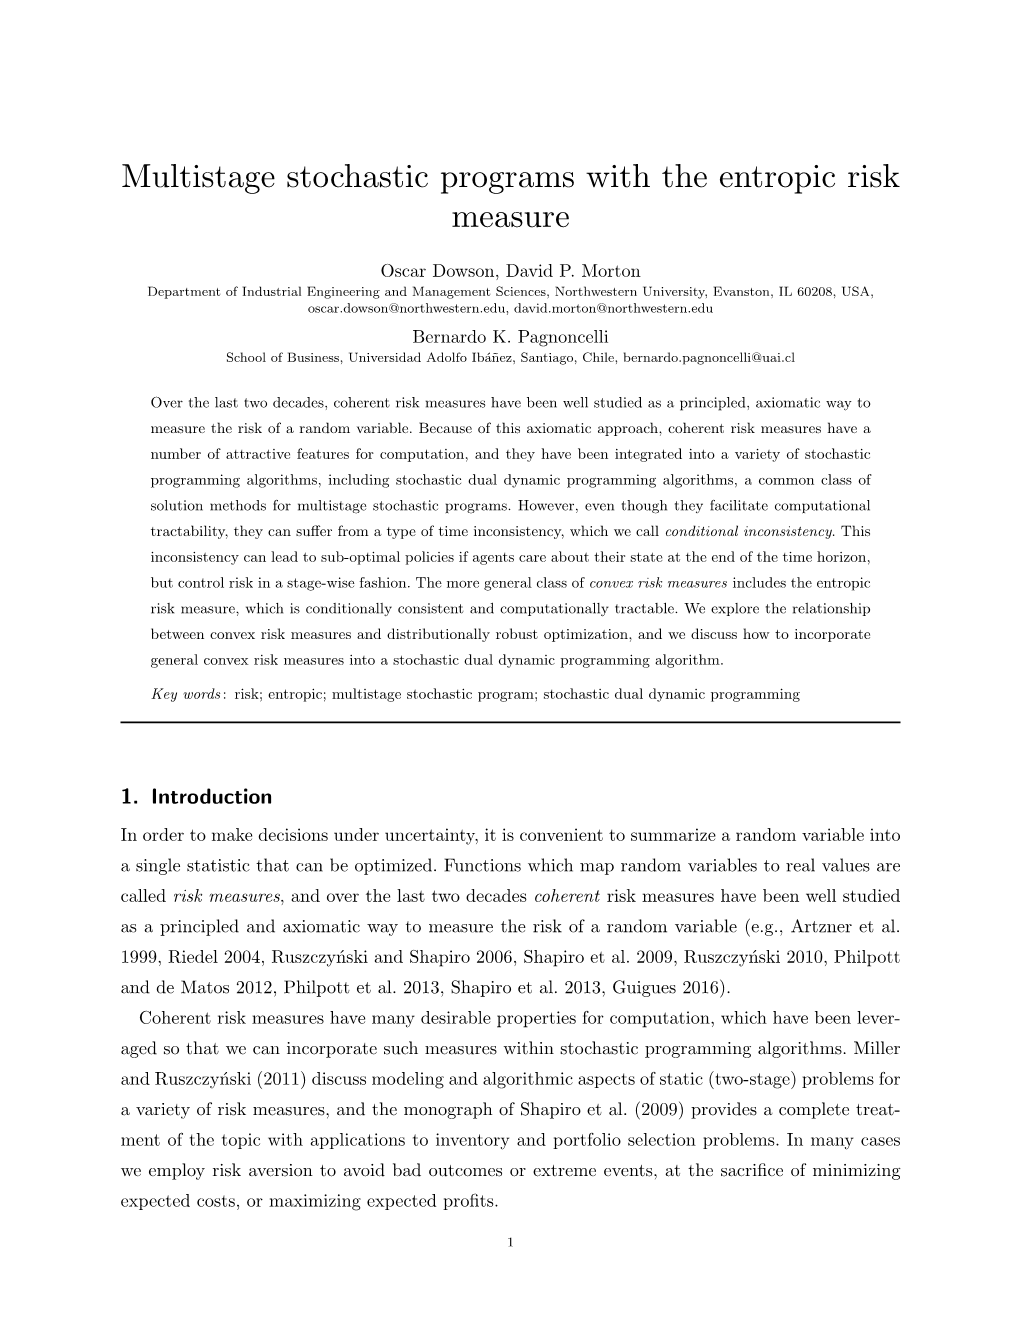 Multistage Stochastic Programs with the Entropic Risk Measure